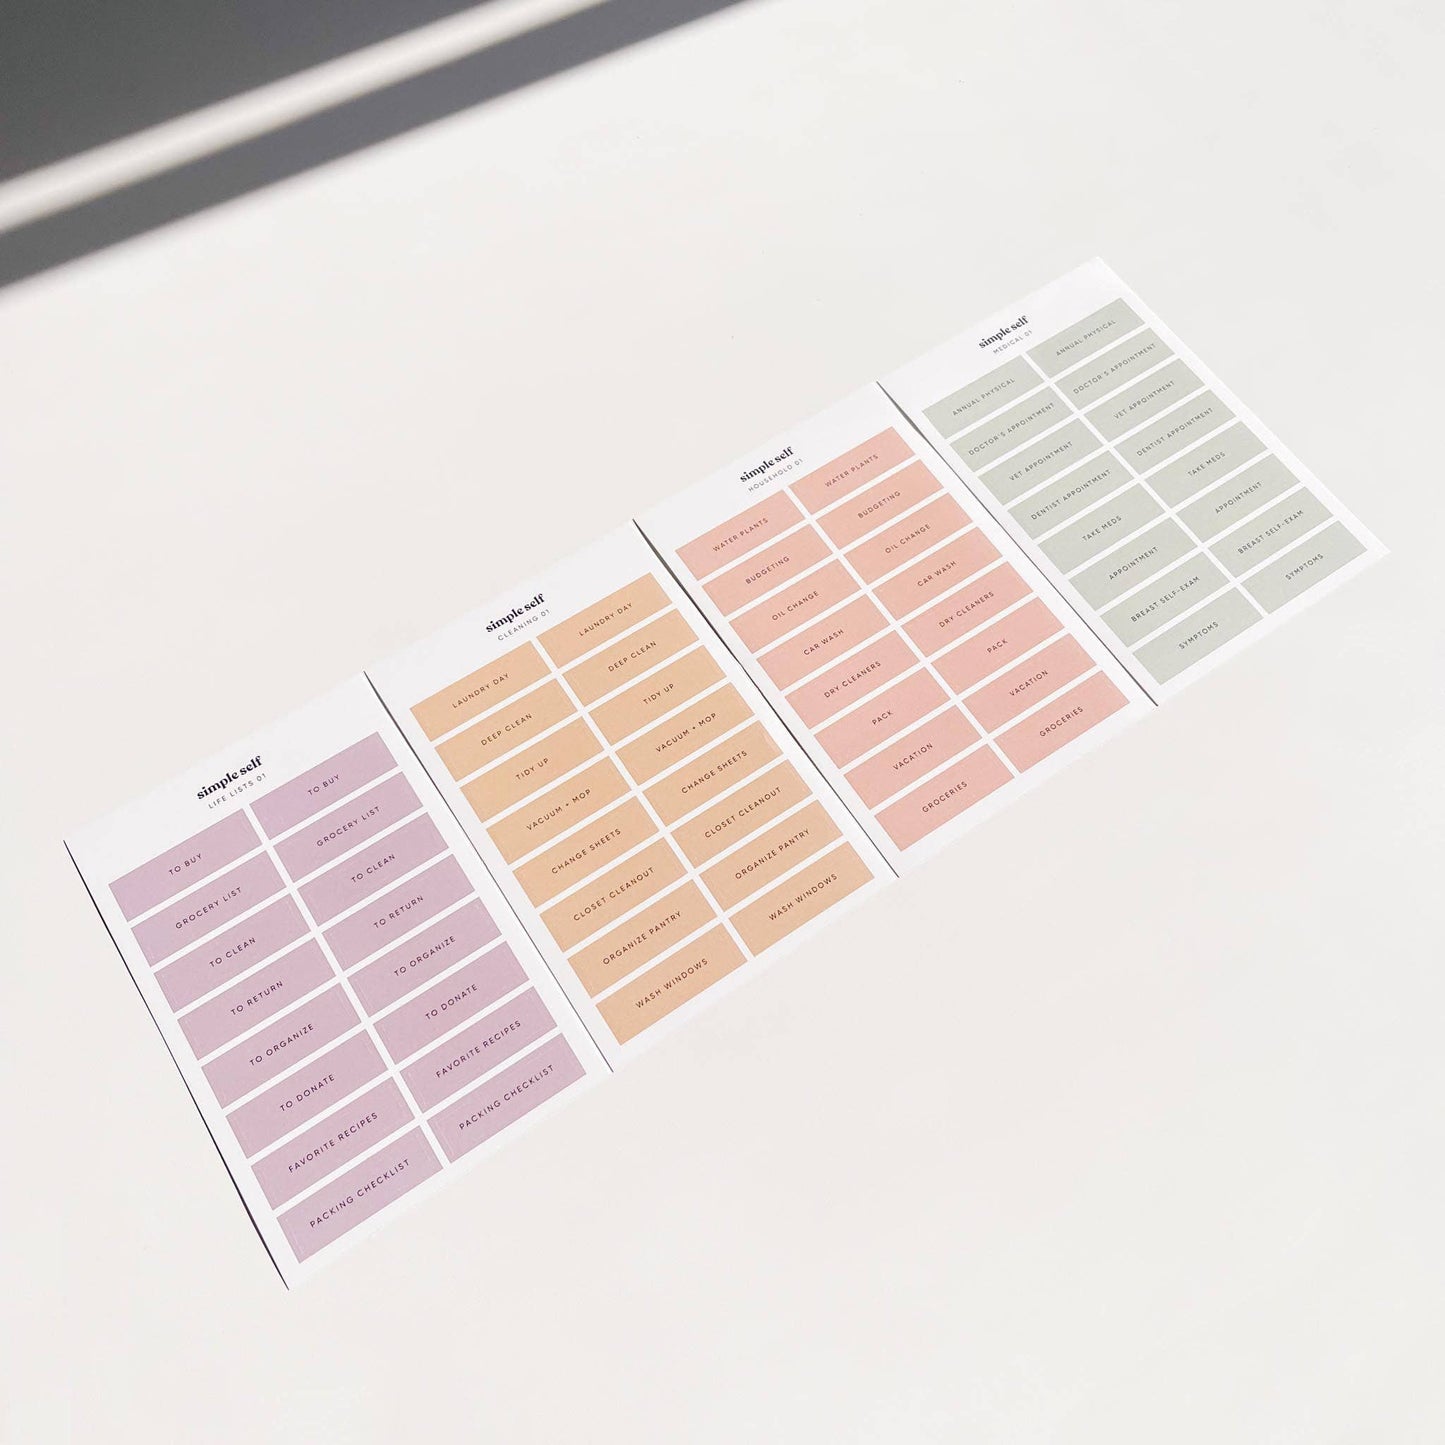 Each of the Life Sticker Set sheets individually spread out for display on plain white background